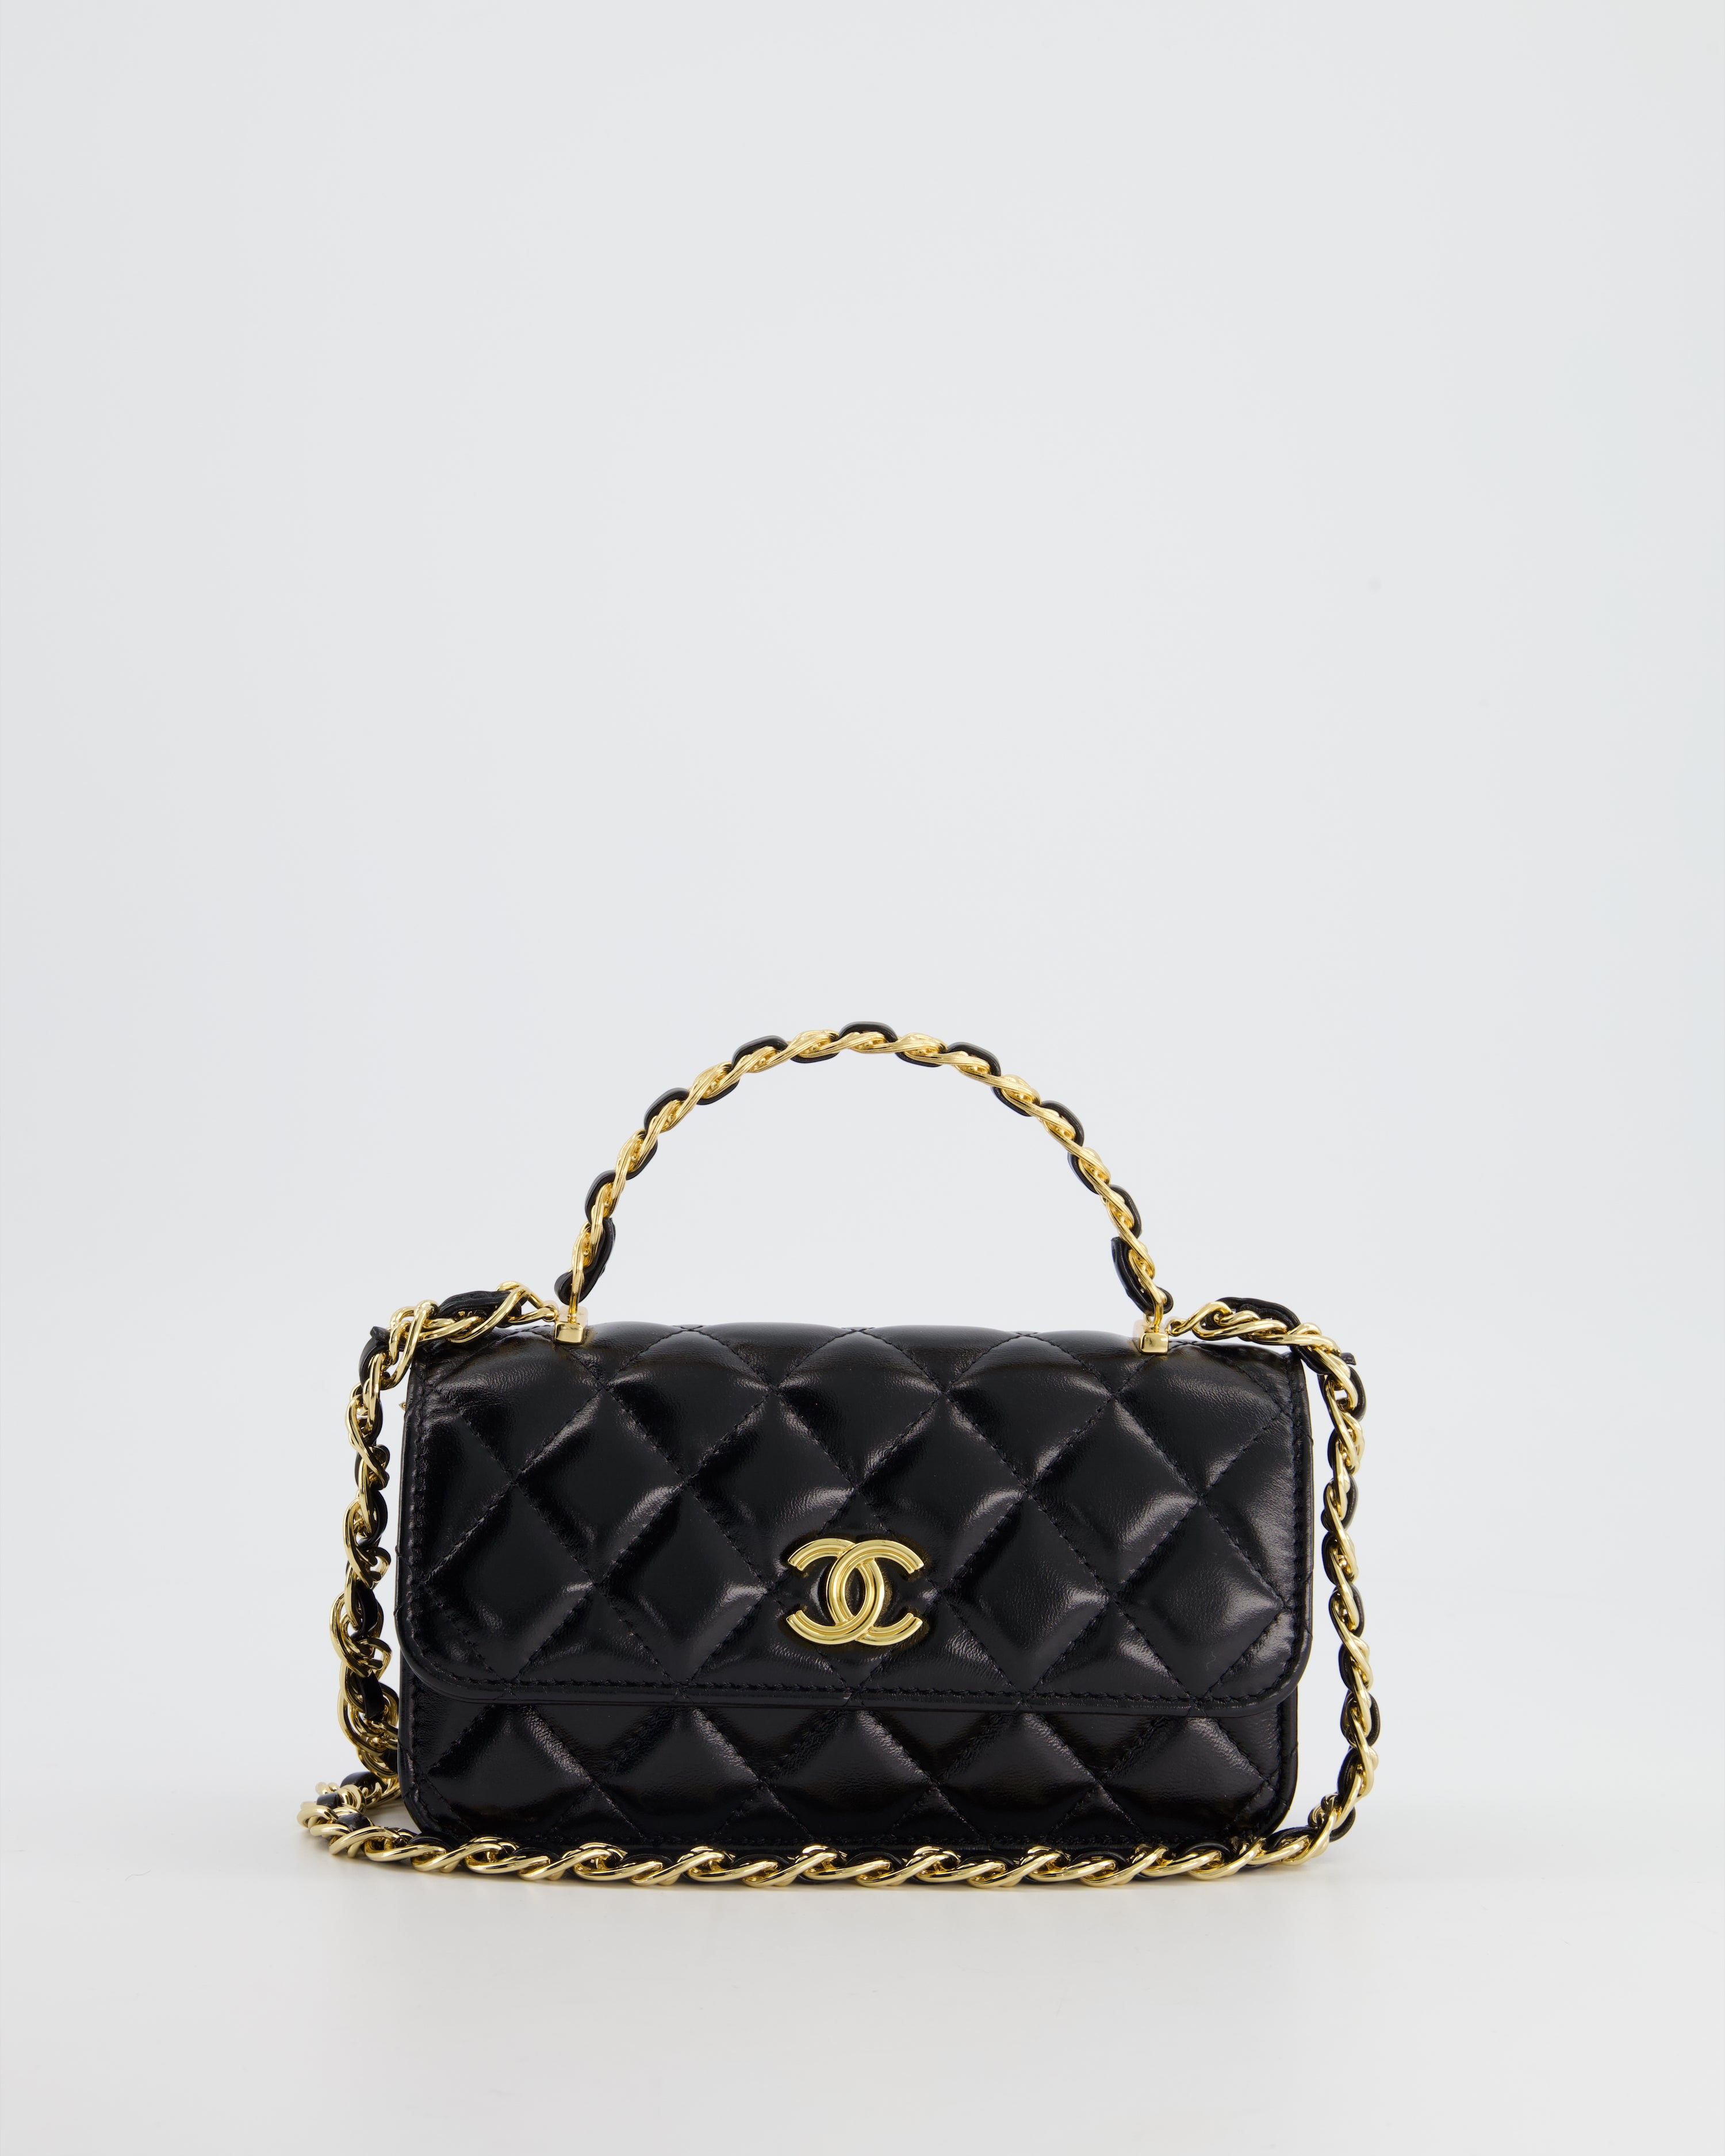 CHANEL Shiny Lambskin Quilted Golden Links Top Handle Flap Black